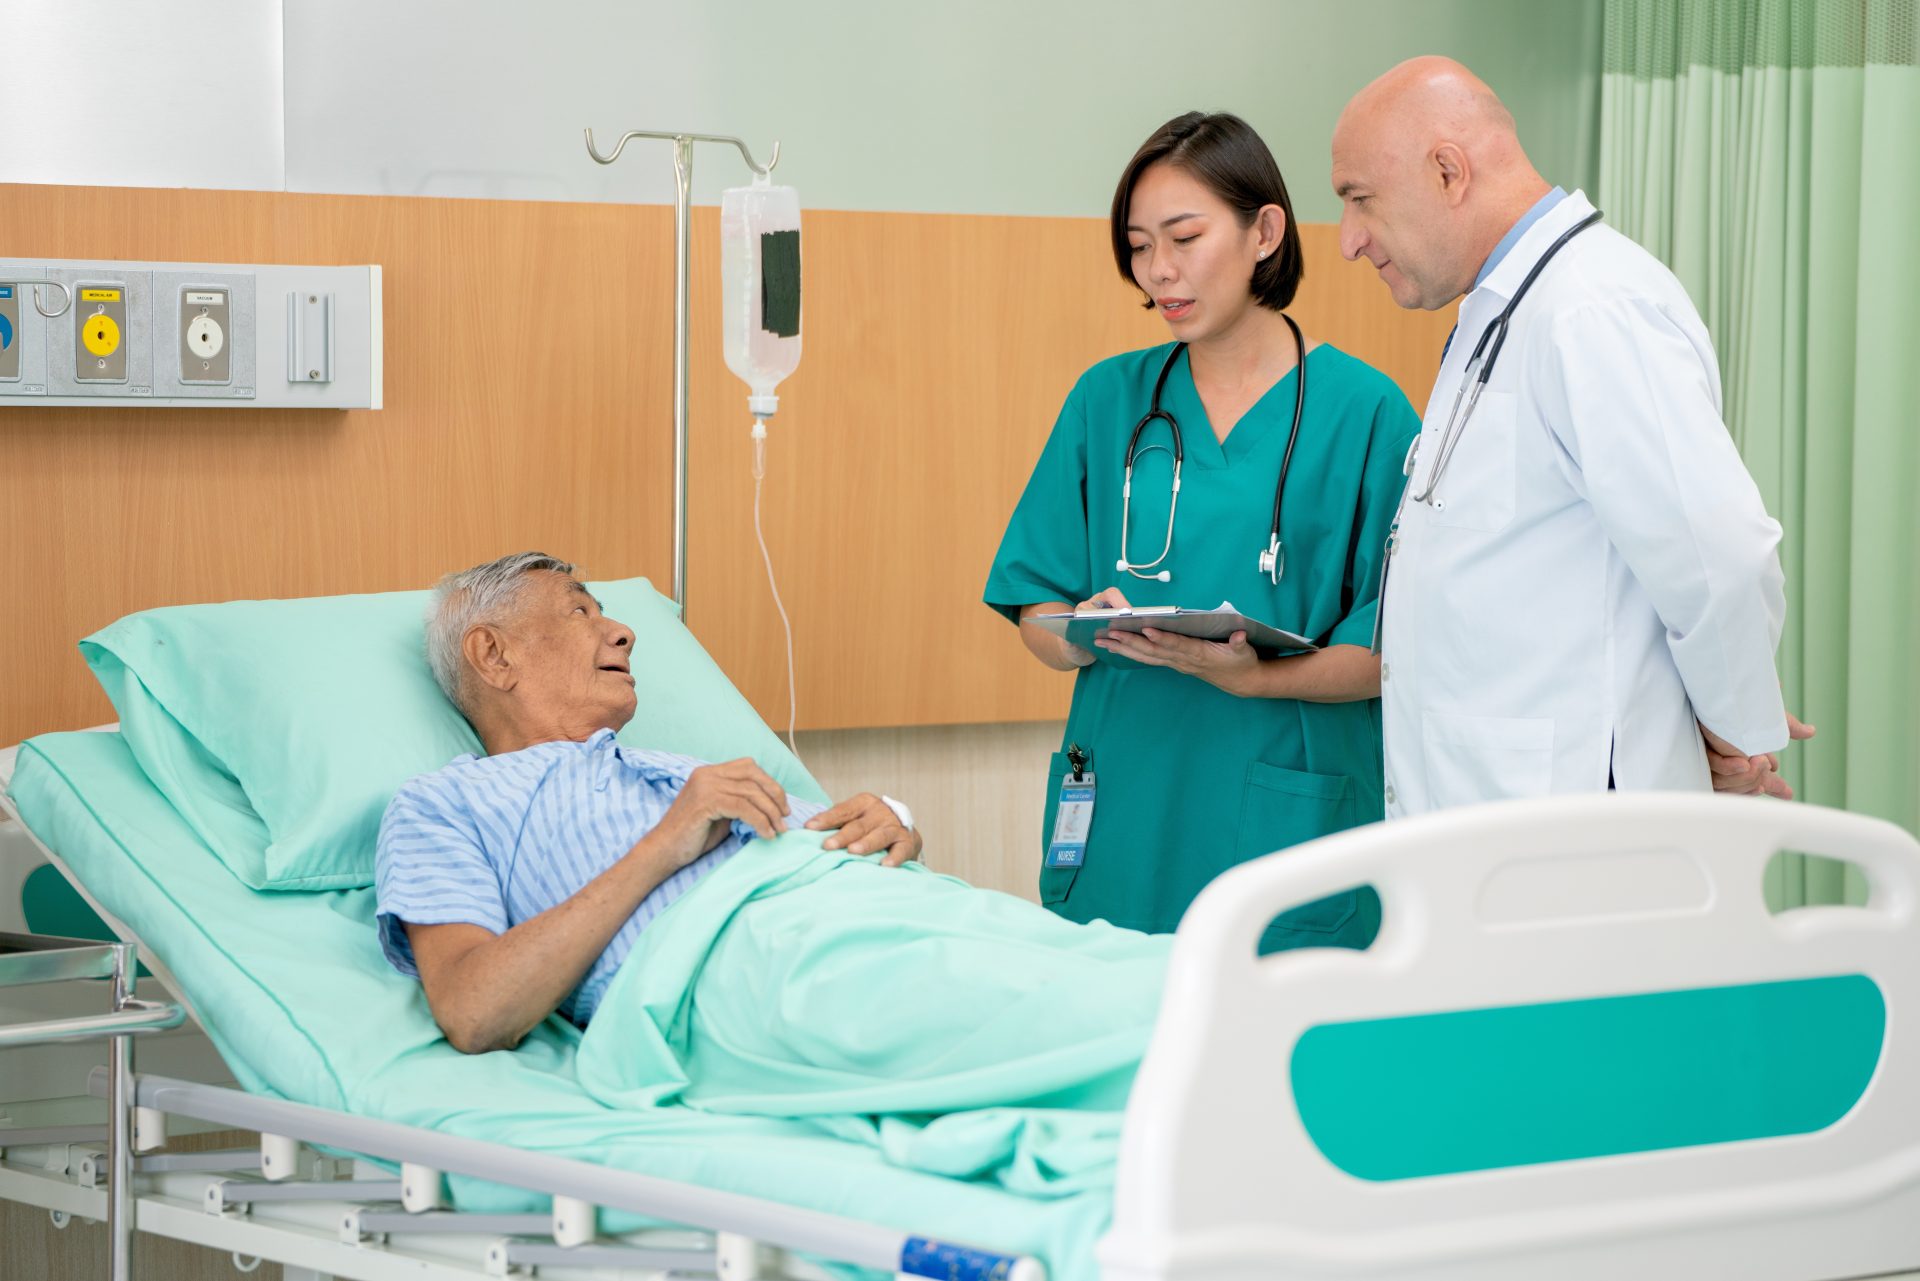 Doctor and nurse talk with elderly patient in hospital